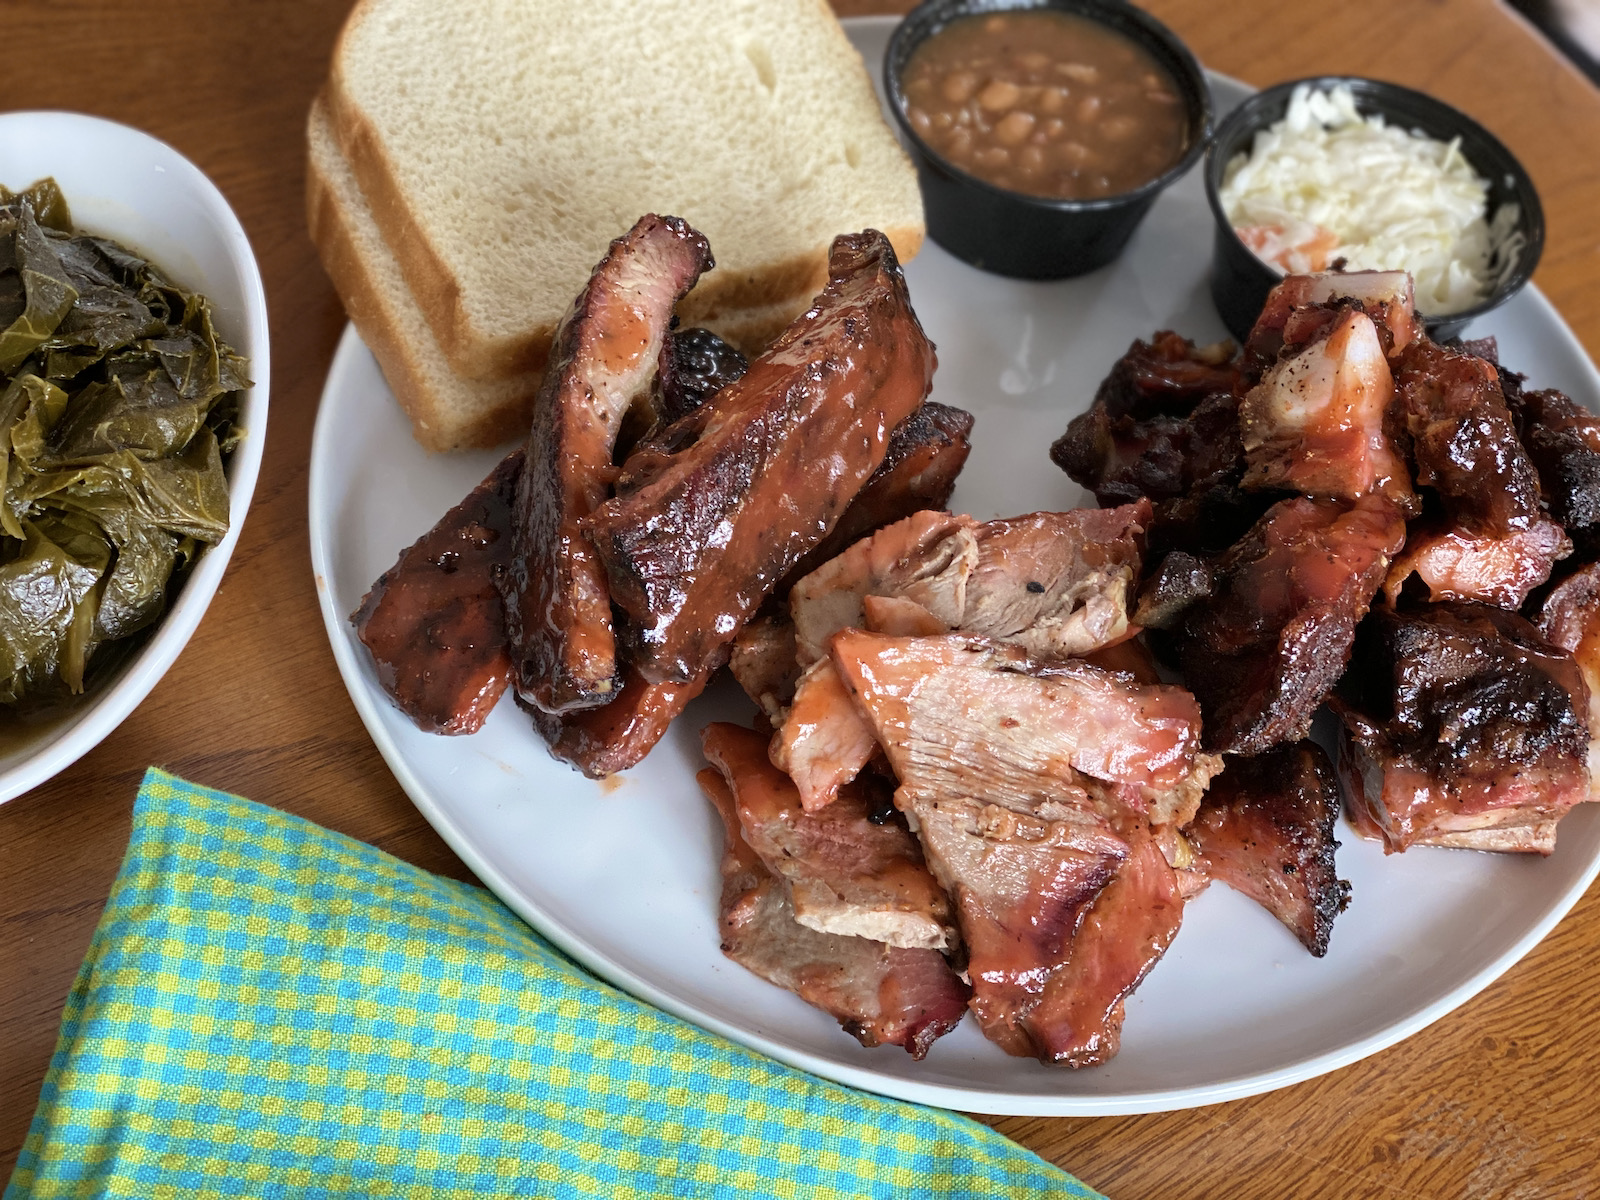 Plate of barbeque from Ashley's Bar-B-Que